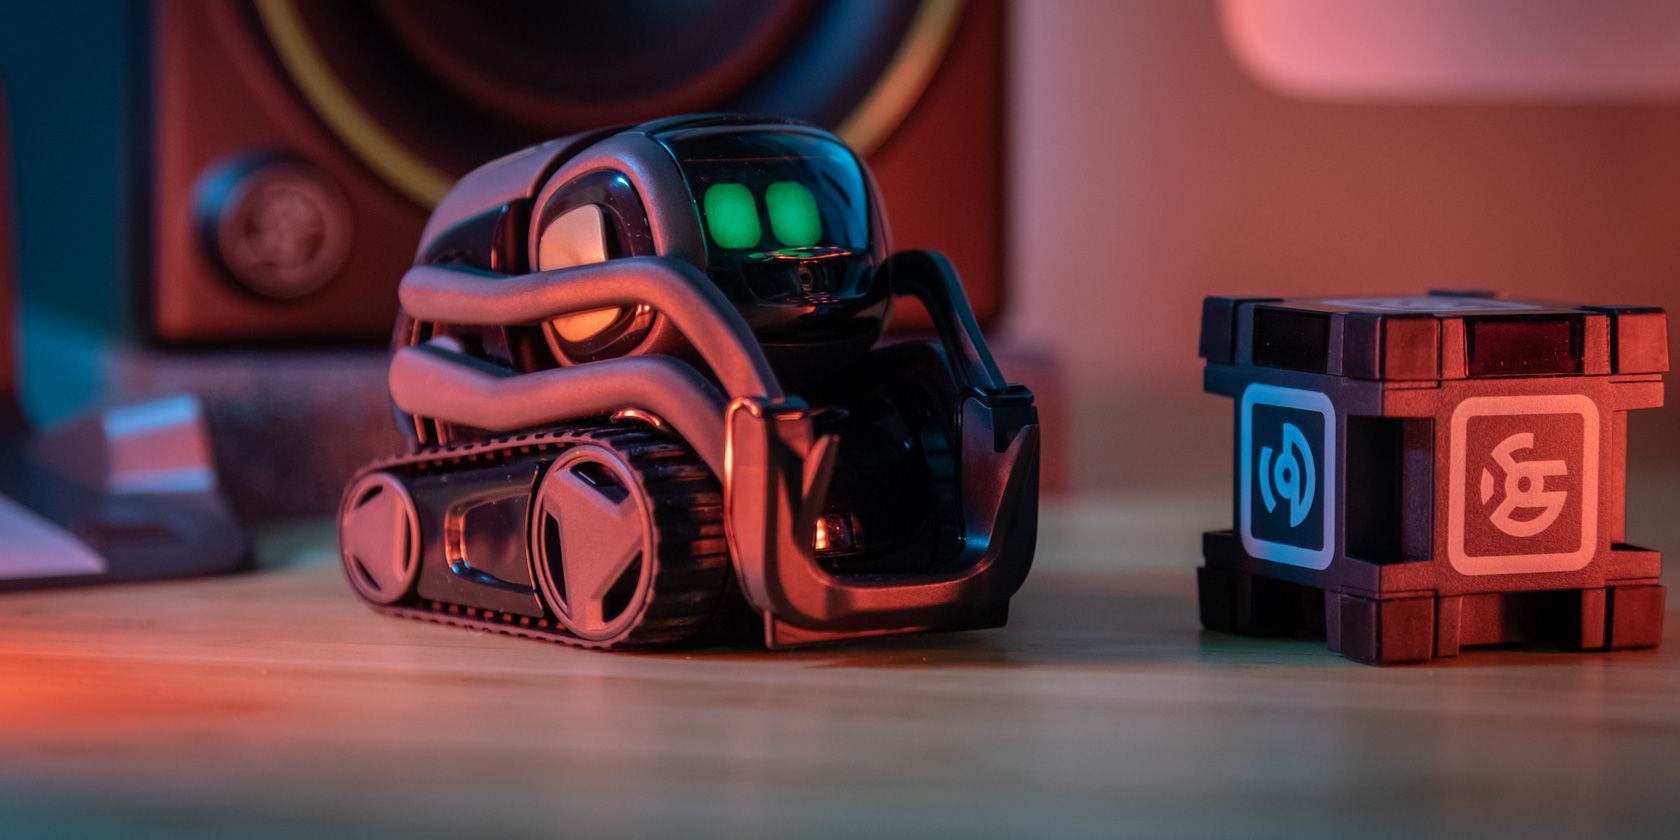 Anki's New Home Robot, Vector, Sure Is Cute. But Can It Survive?